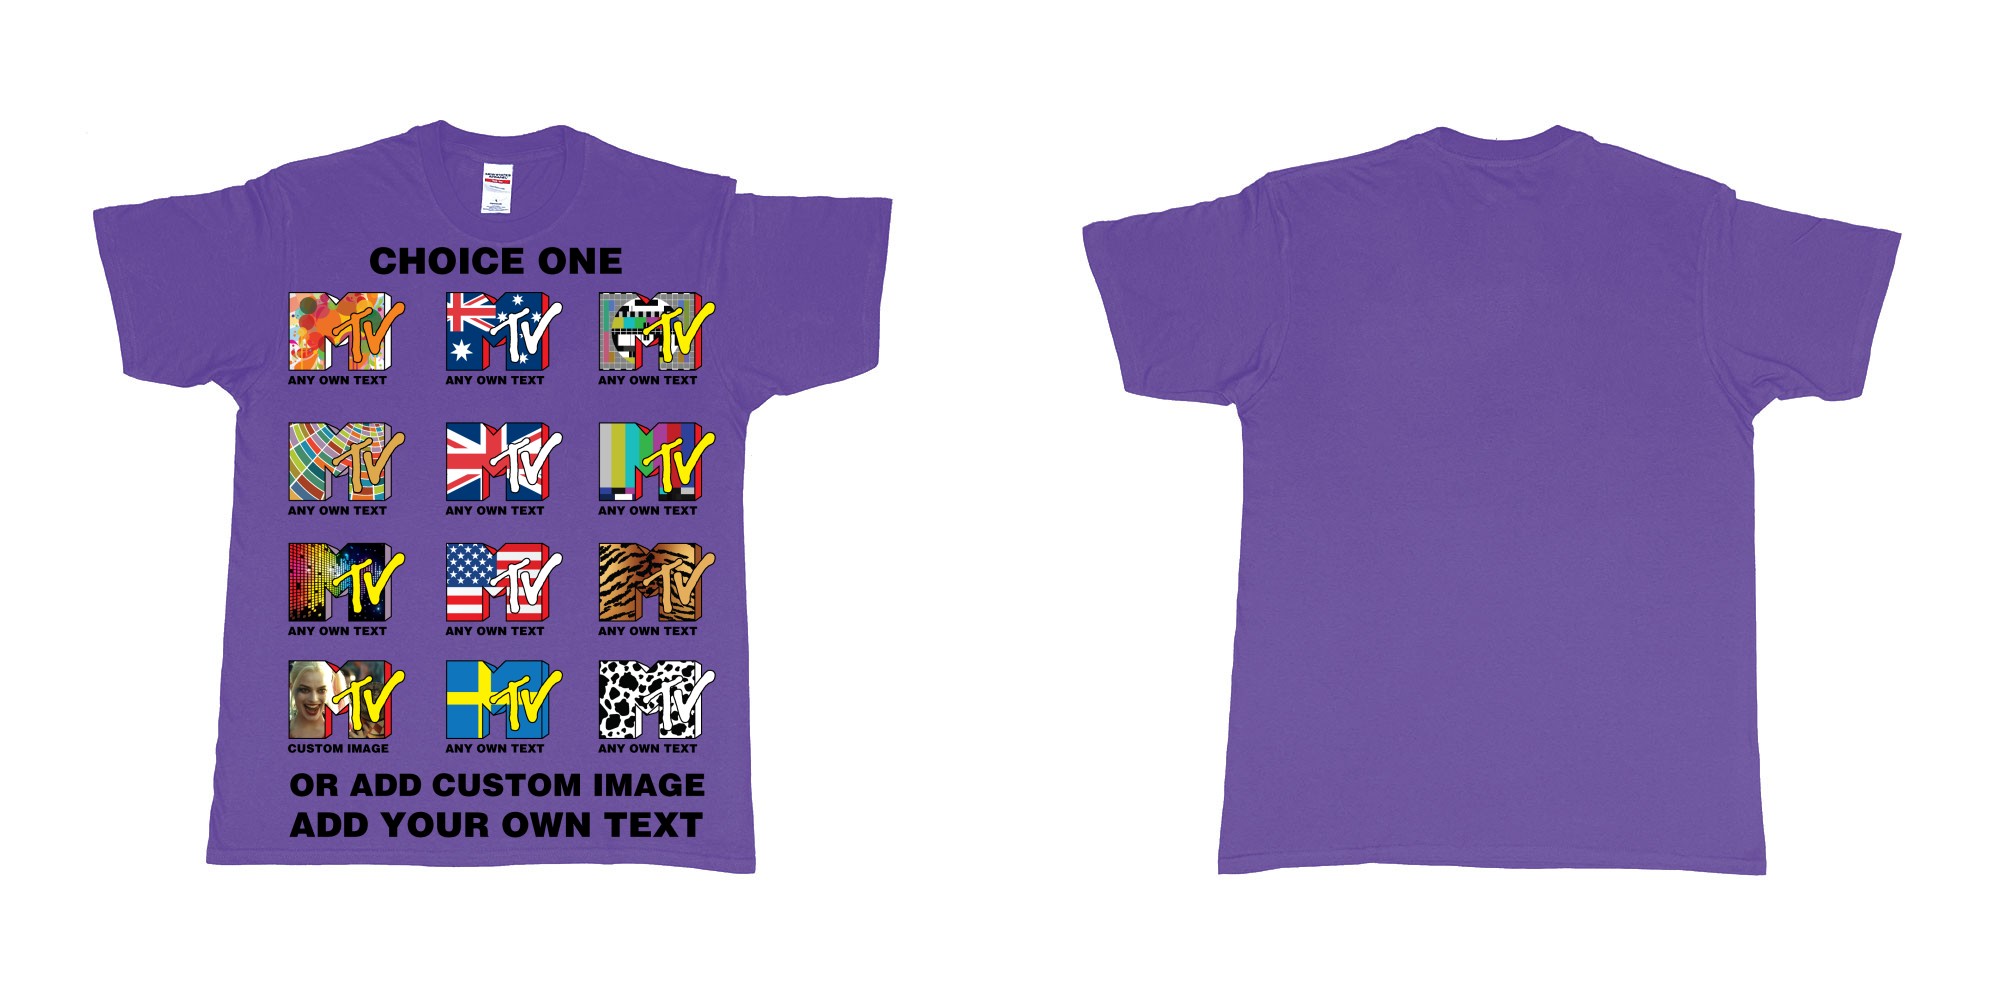 Custom tshirt design mtv logo choice any background text print in fabric color purple choice your own text made in Bali by The Pirate Way